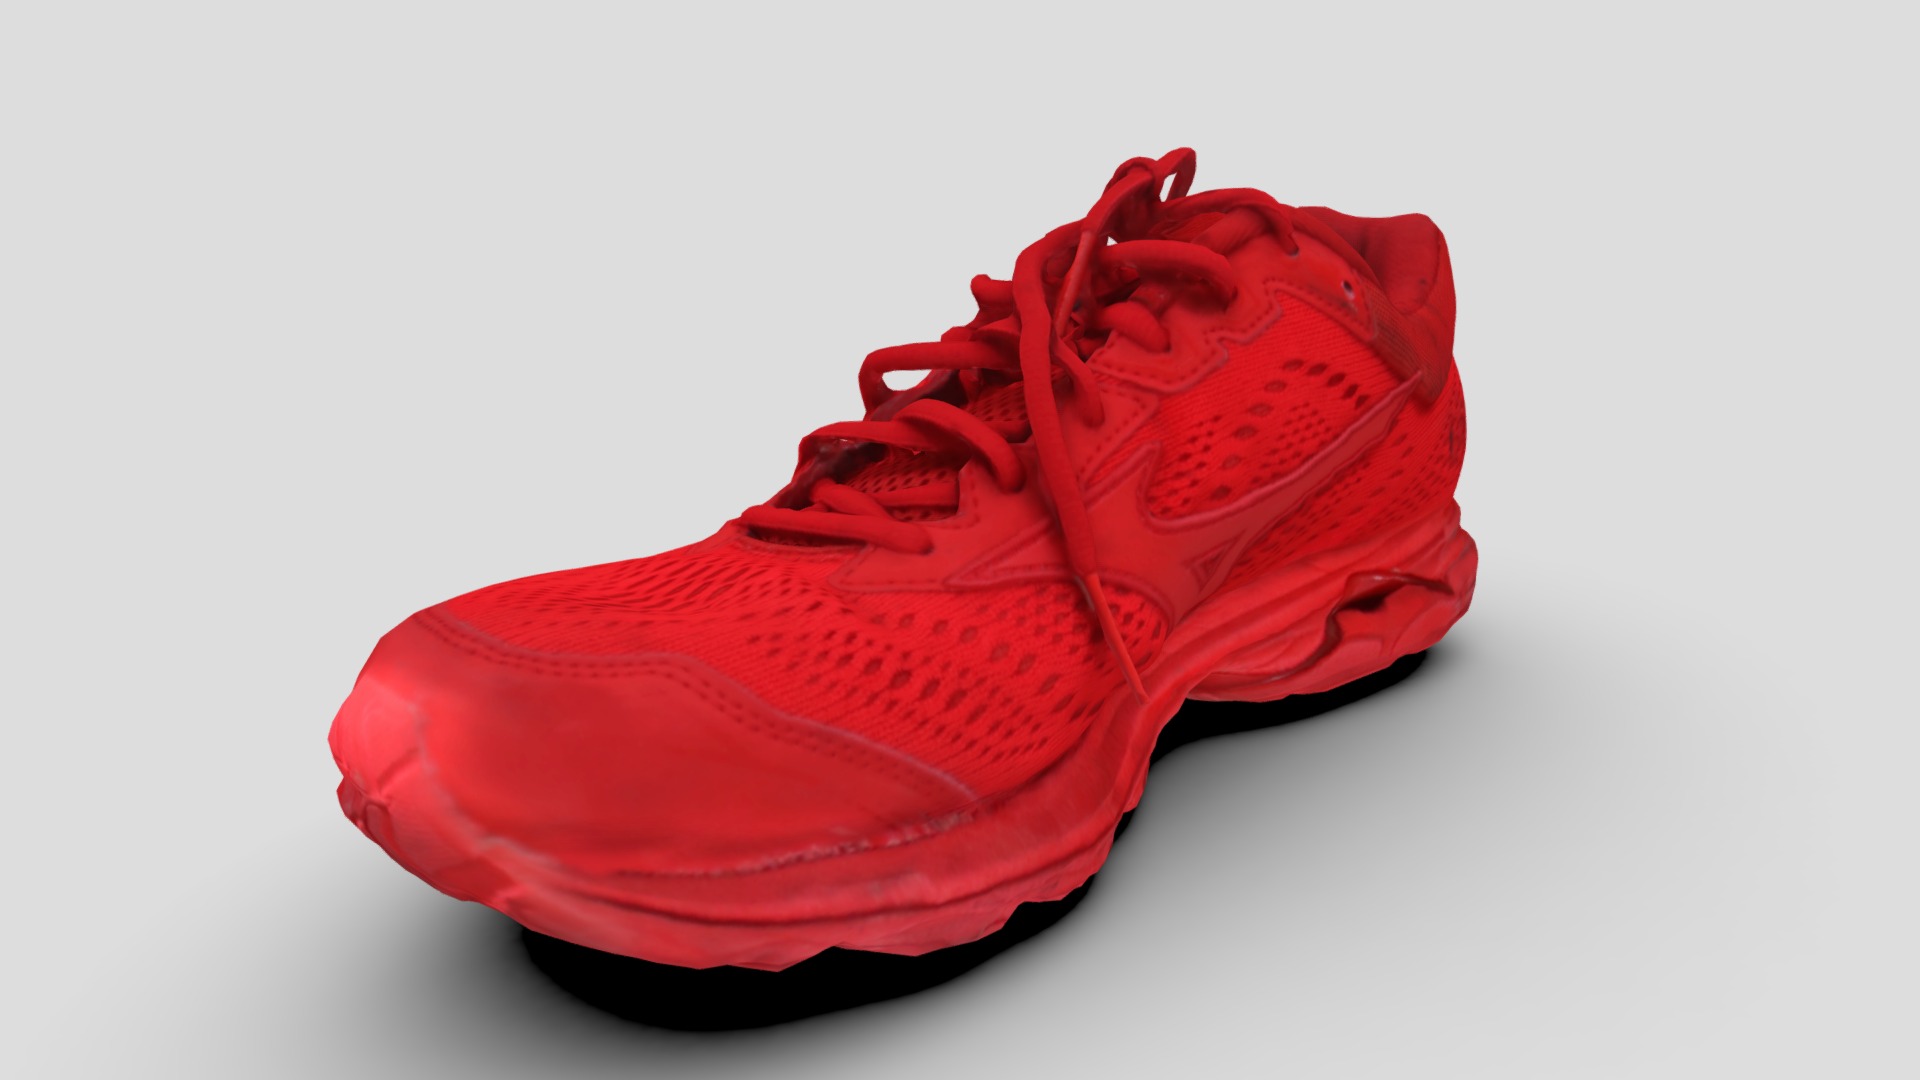 3D model Mizuno Shoe - This is a 3D model of the Mizuno Shoe. The 3D model is about a red shoe with a white background.